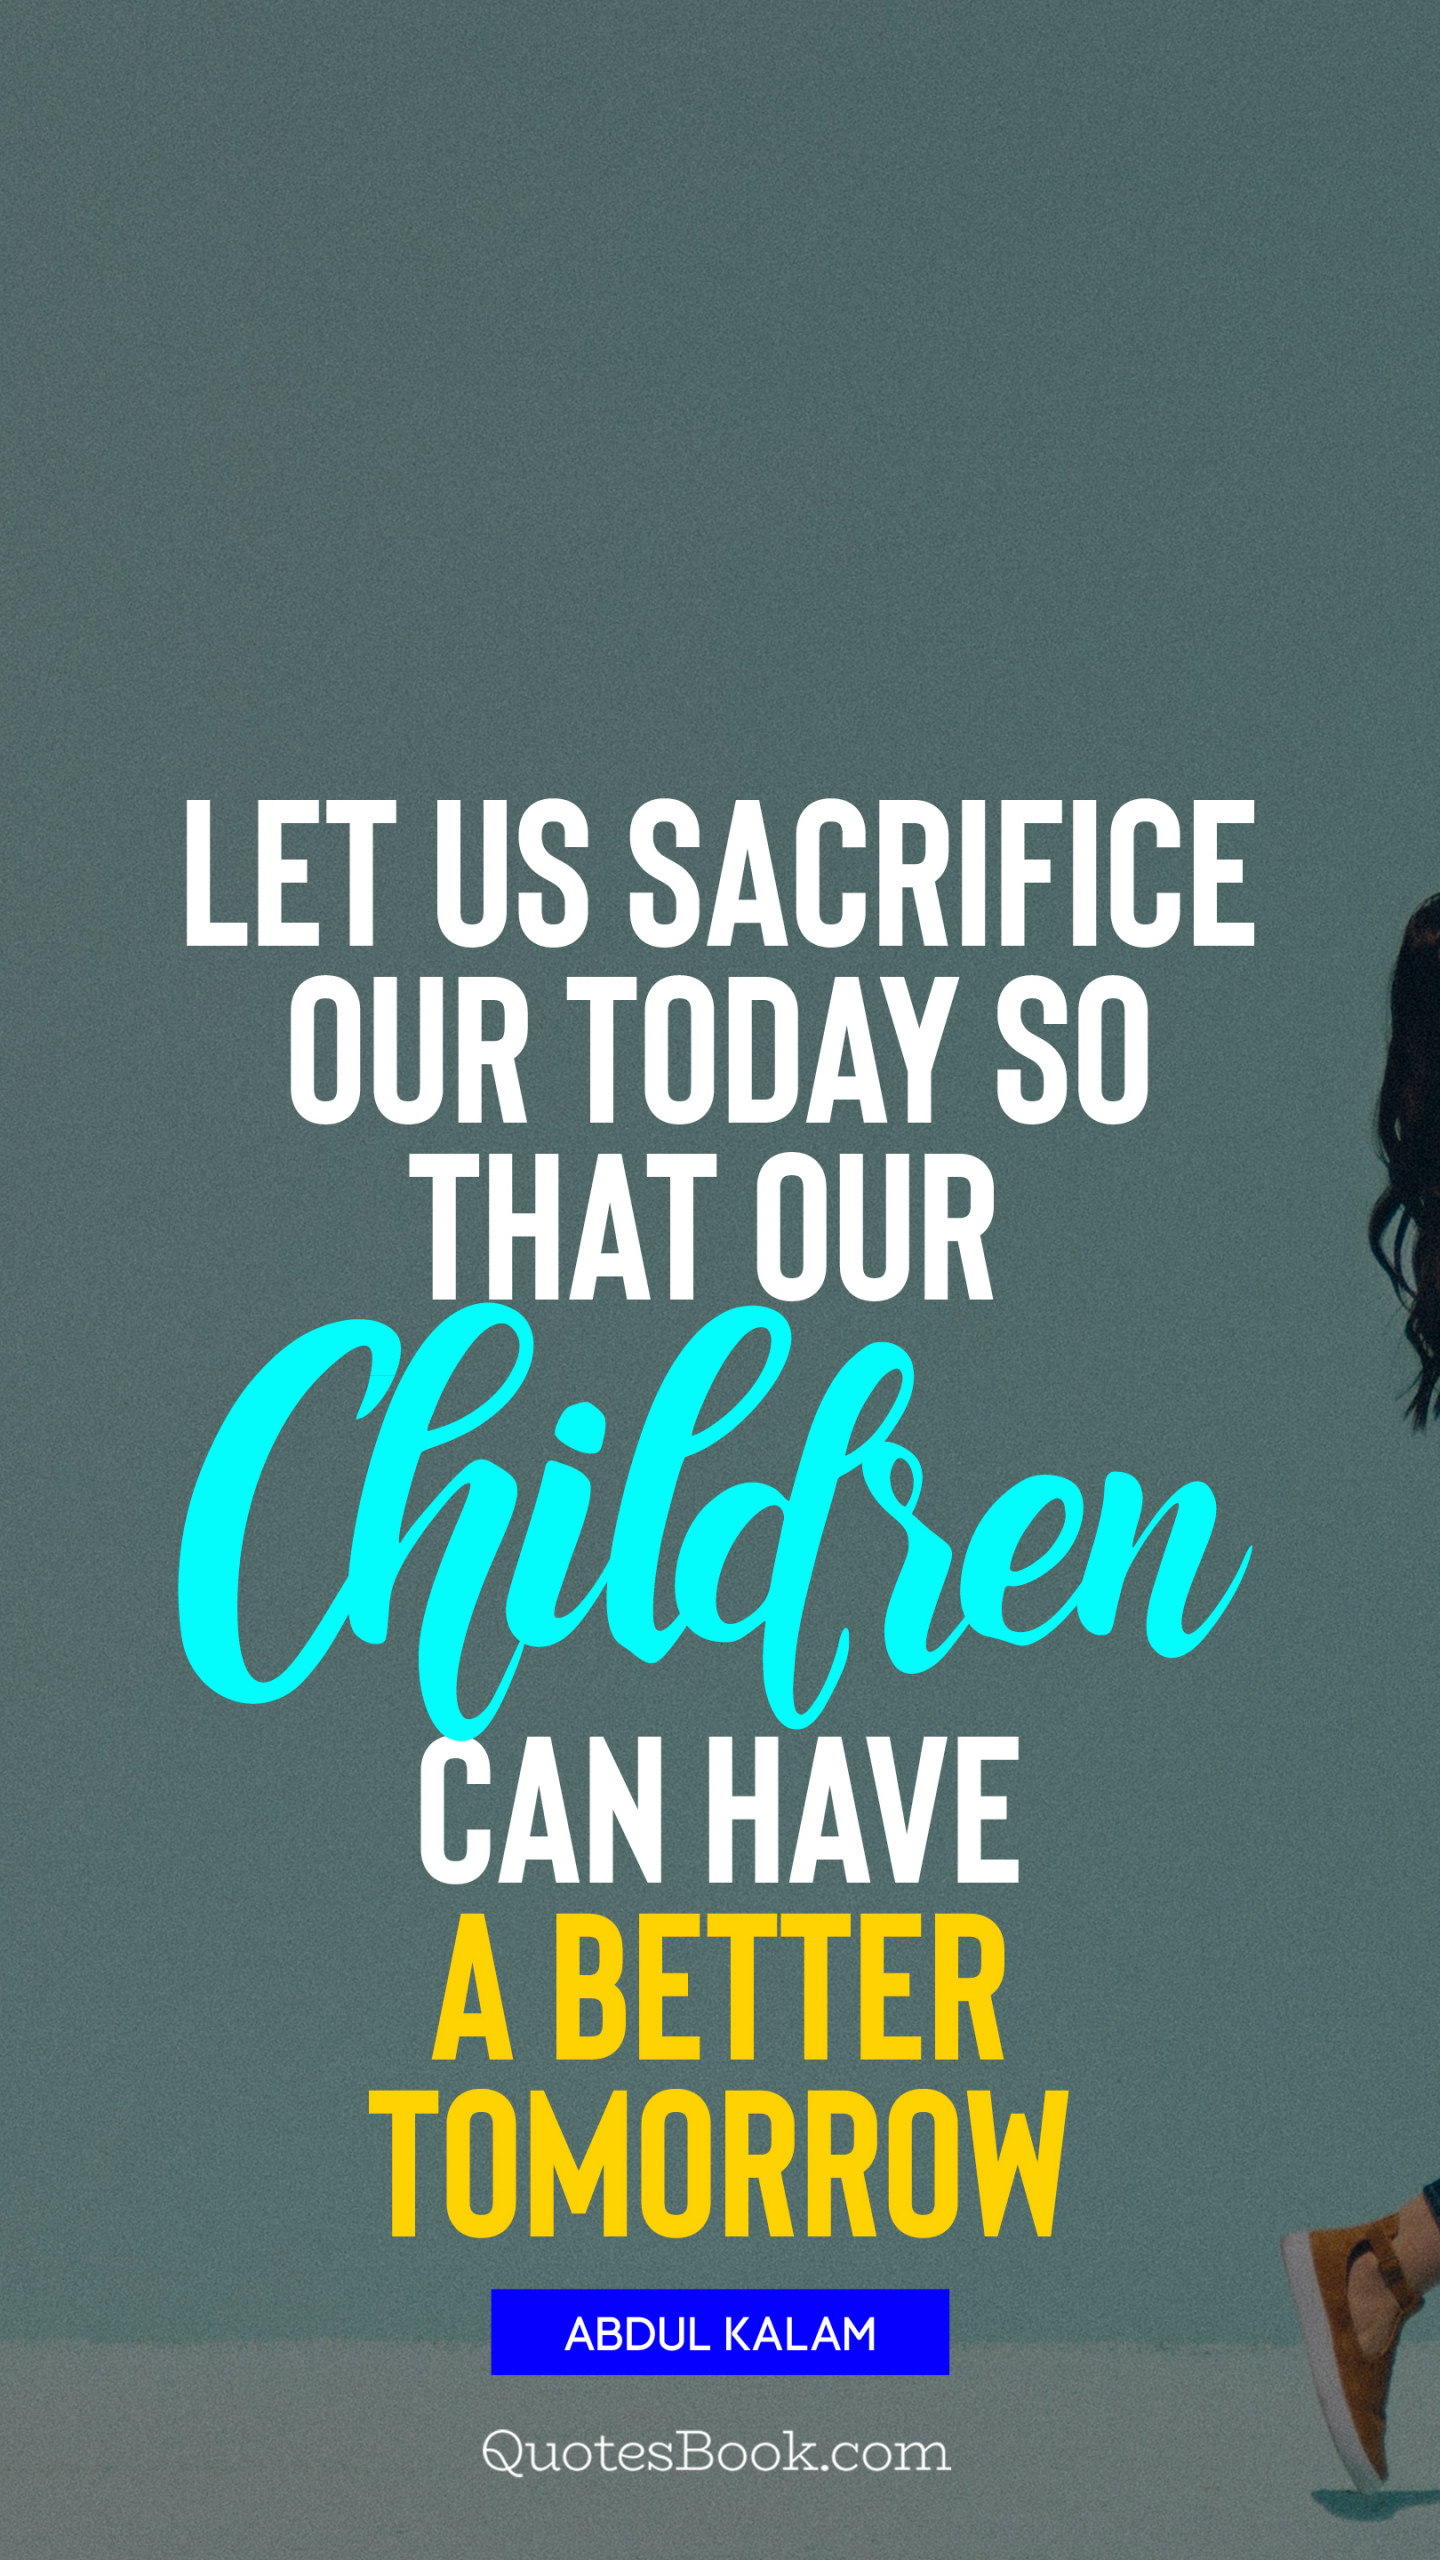 Let us sacrifice our today so that our children can have a 